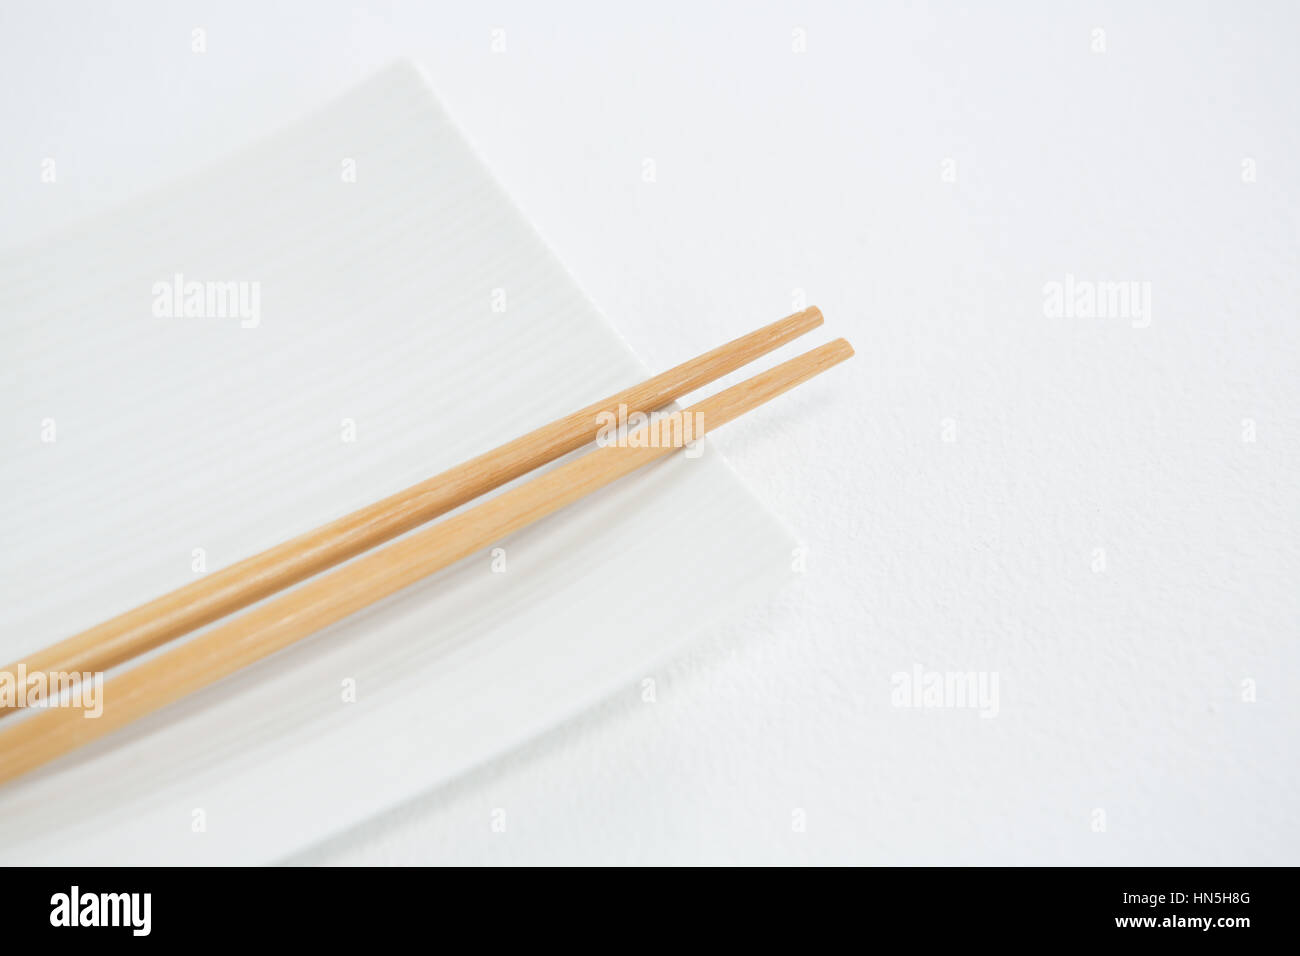 Chopstick with empty plate against white background Stock Photo